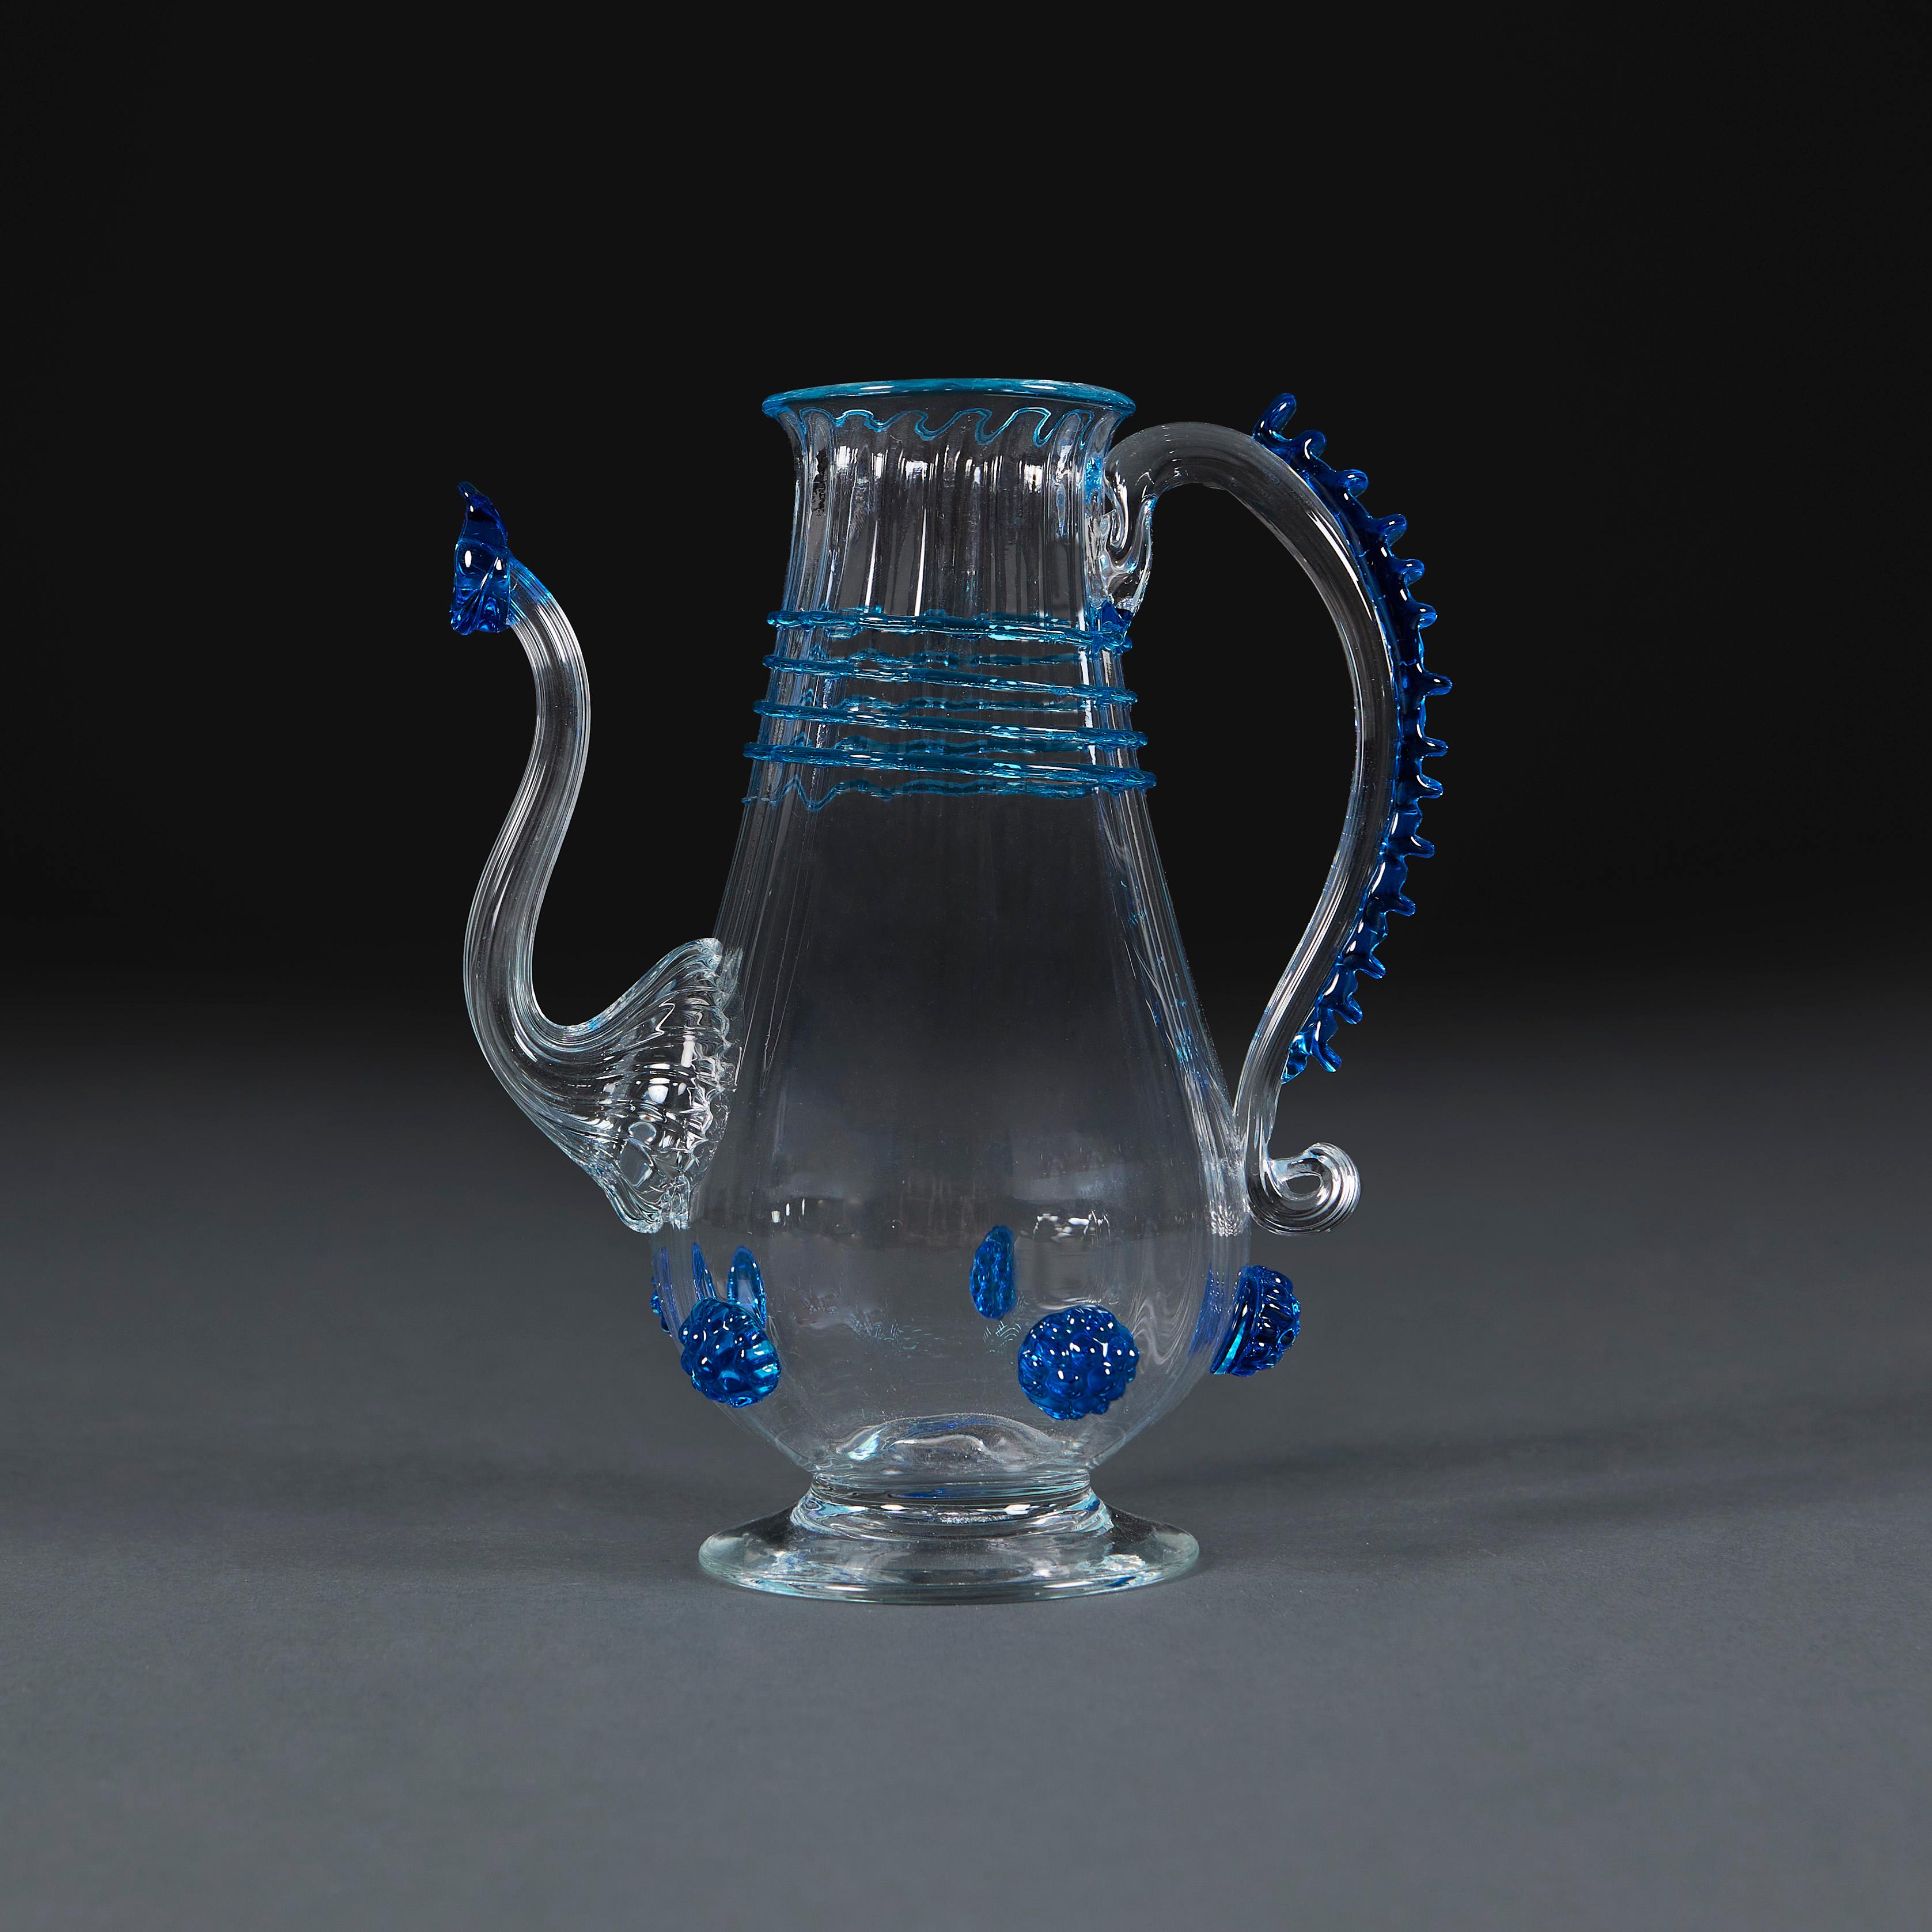 Italy, Murano, circa 1940.

A fine Murano olive oil ewer of diminutive form, decorated with stylised blue paterae and applied spiral lines to the body.

Height 17.00cm
Width 10.00cm
Depth 15.00cm